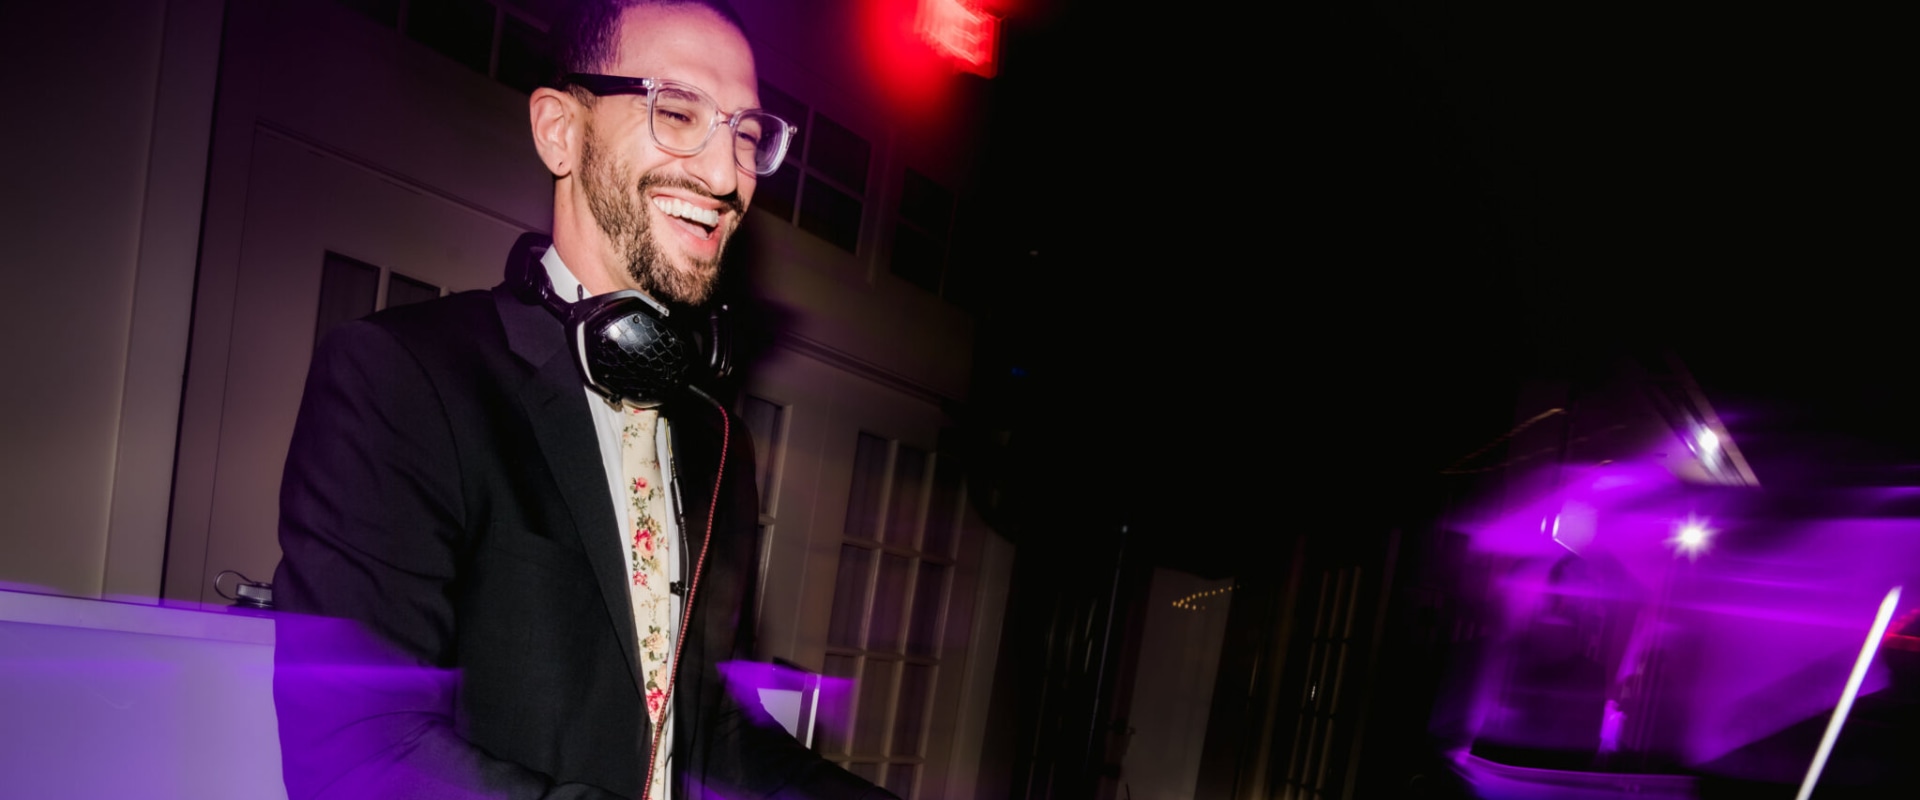 Reading Wedding DJ/Band Reviews: How to Choose the Perfect Supplier